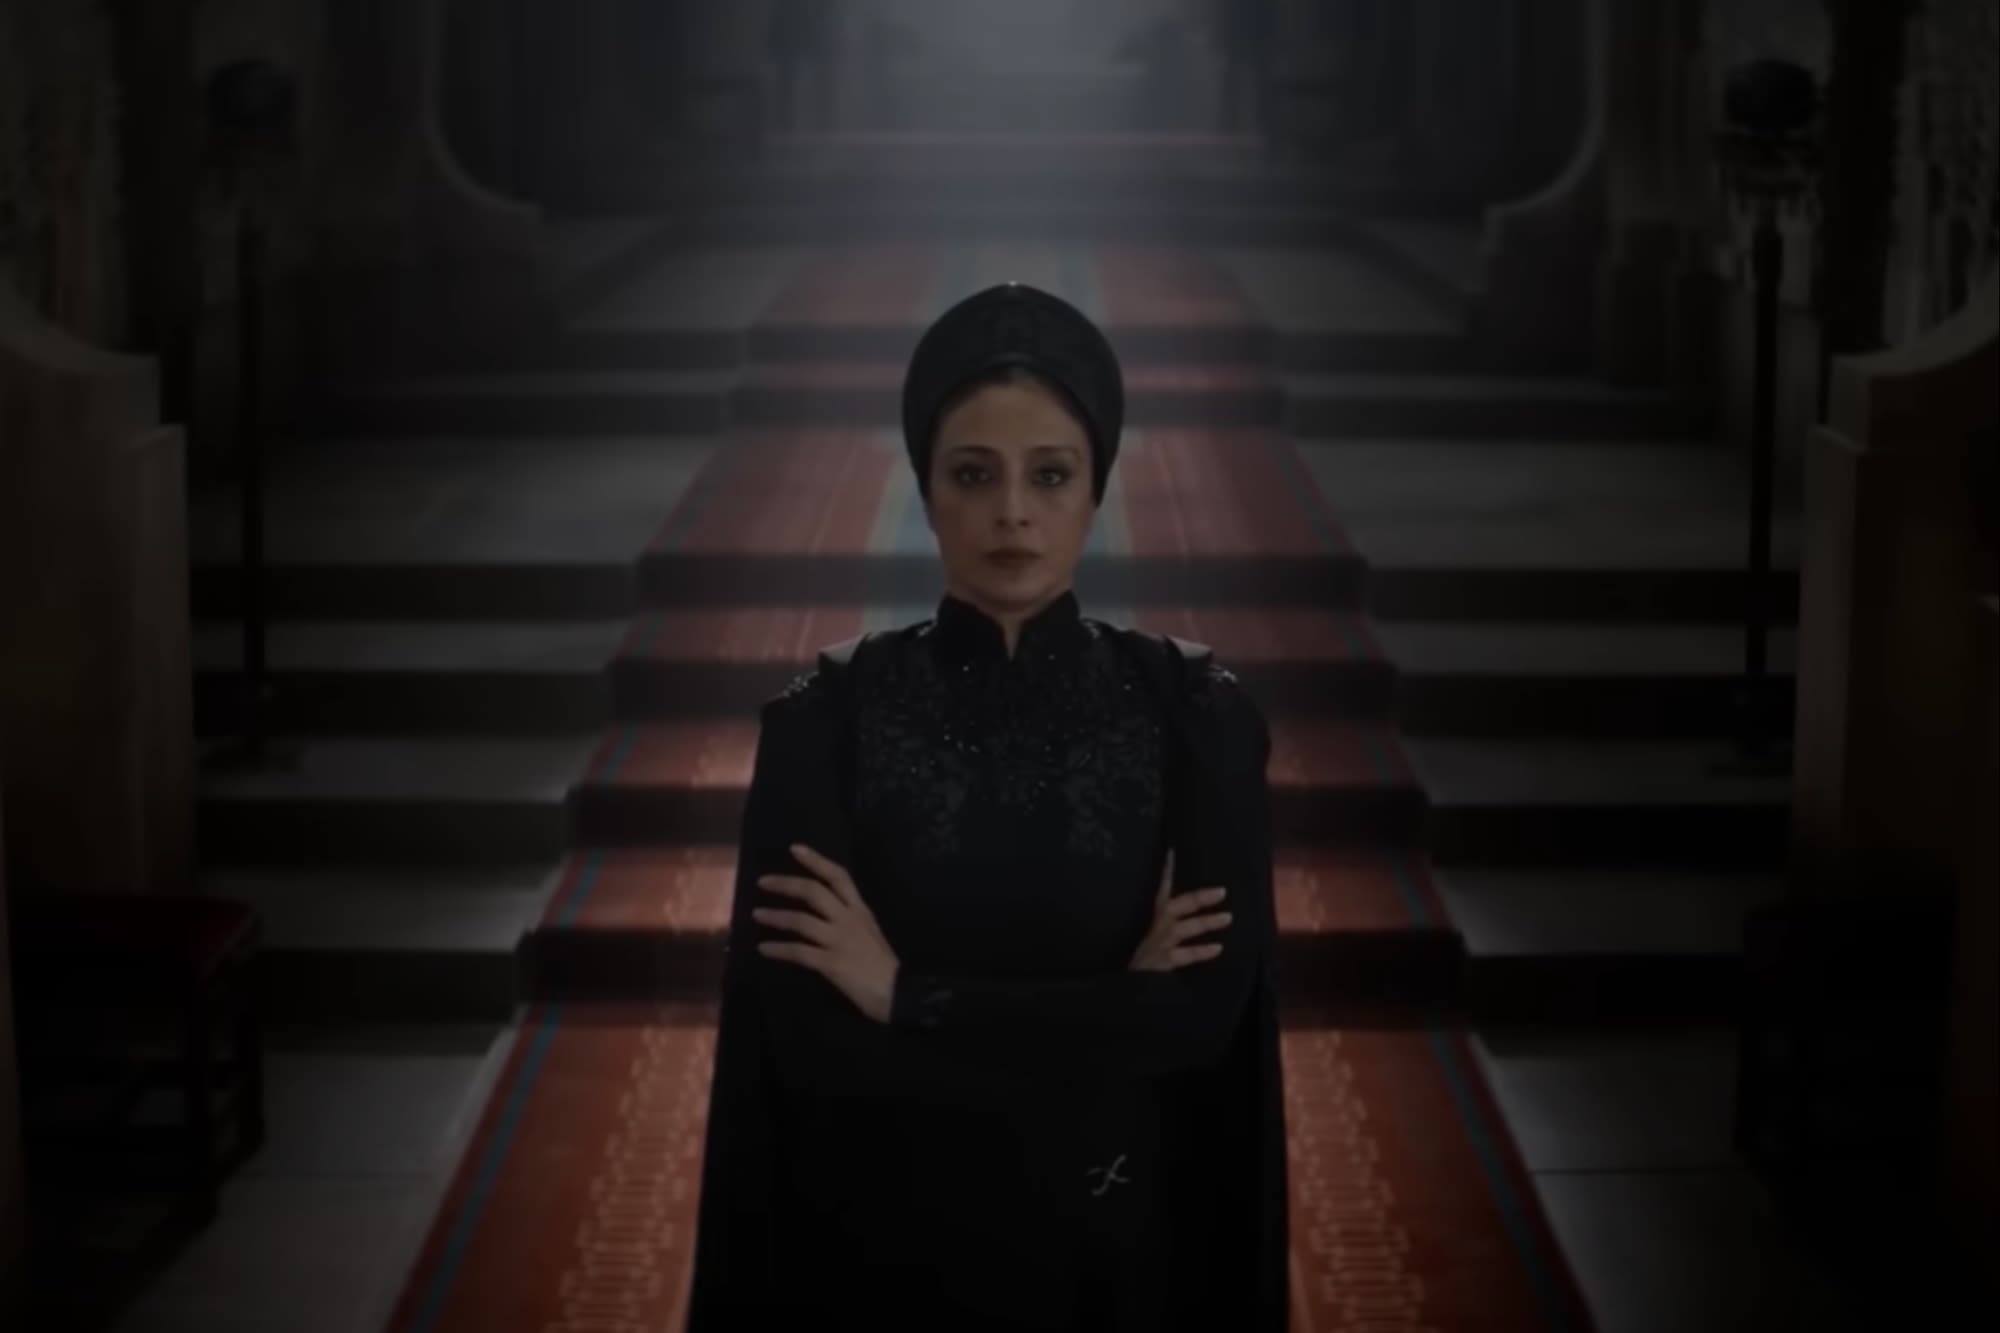 The Sisterhood gains power in new Dune: Prophecy teaser trailer